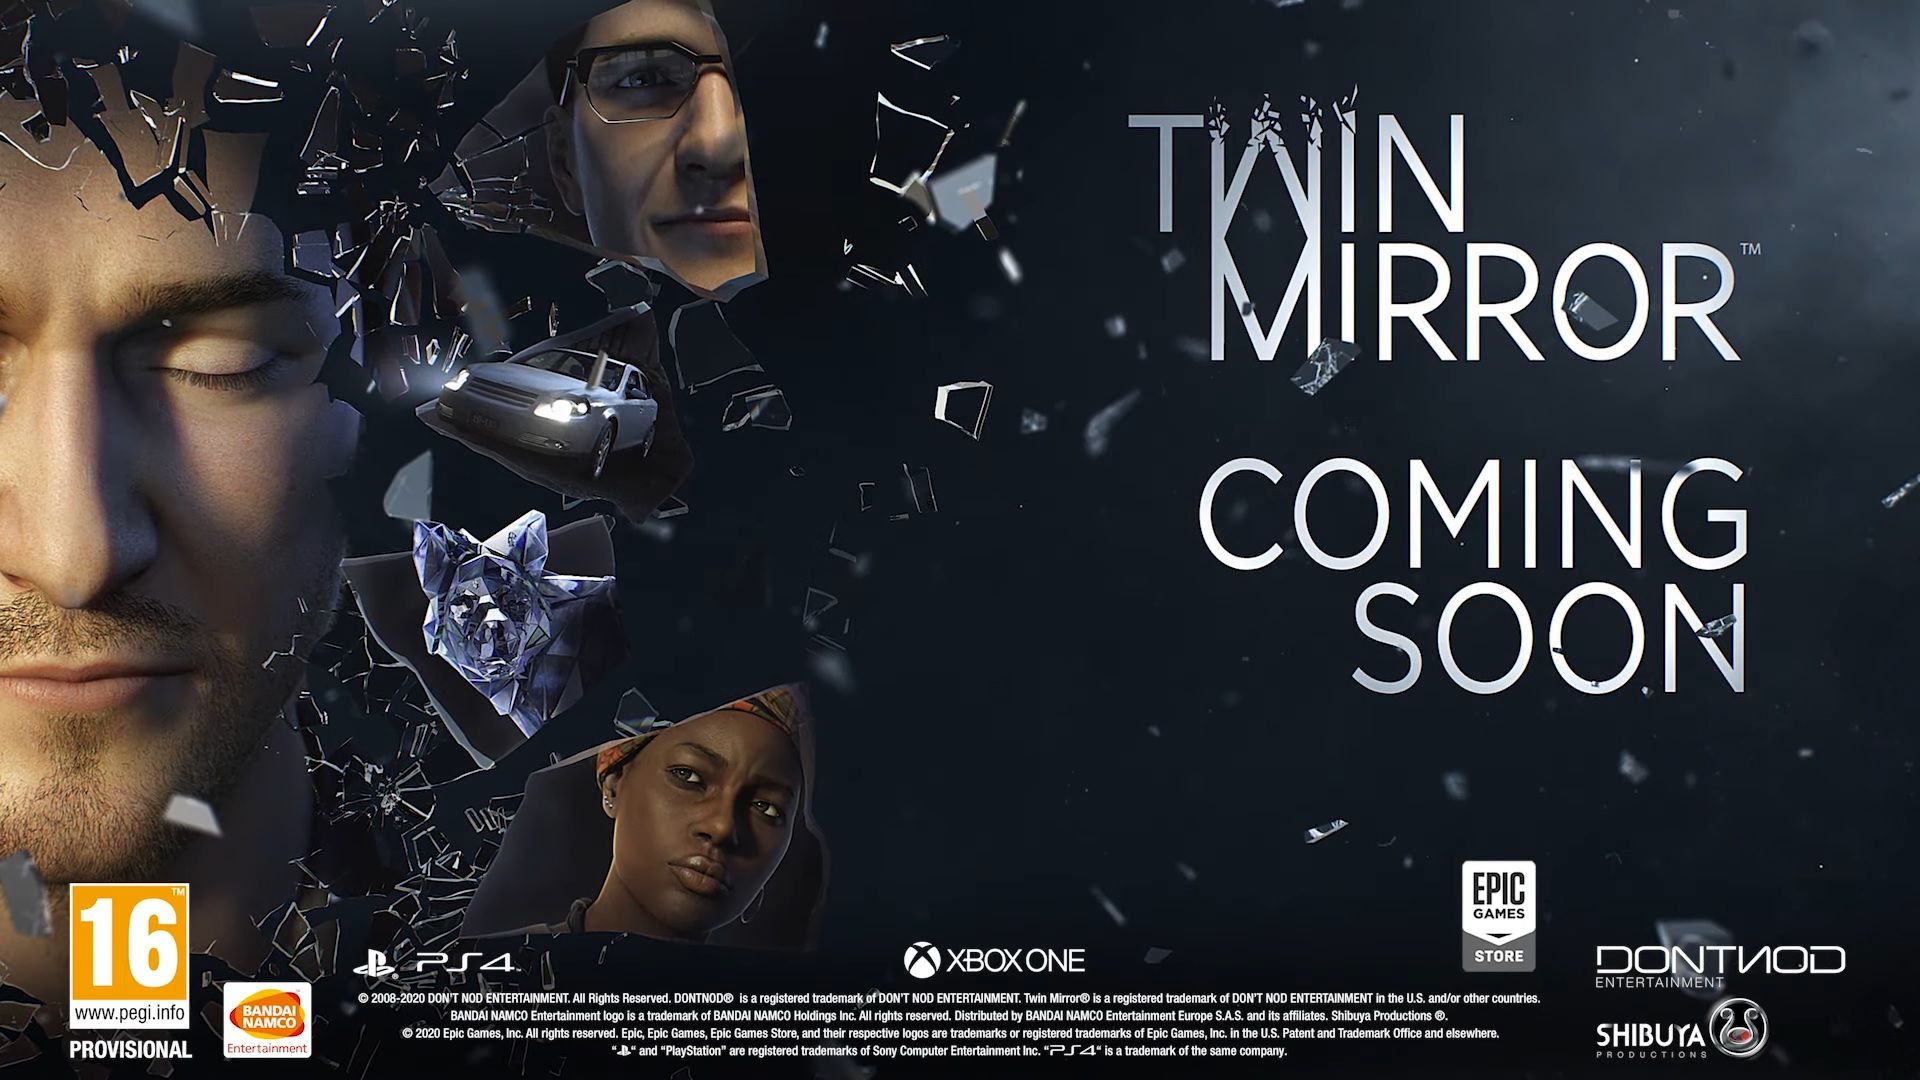 Twin Mirror Video Game Not Episodic Anymore and Still Launching This Year